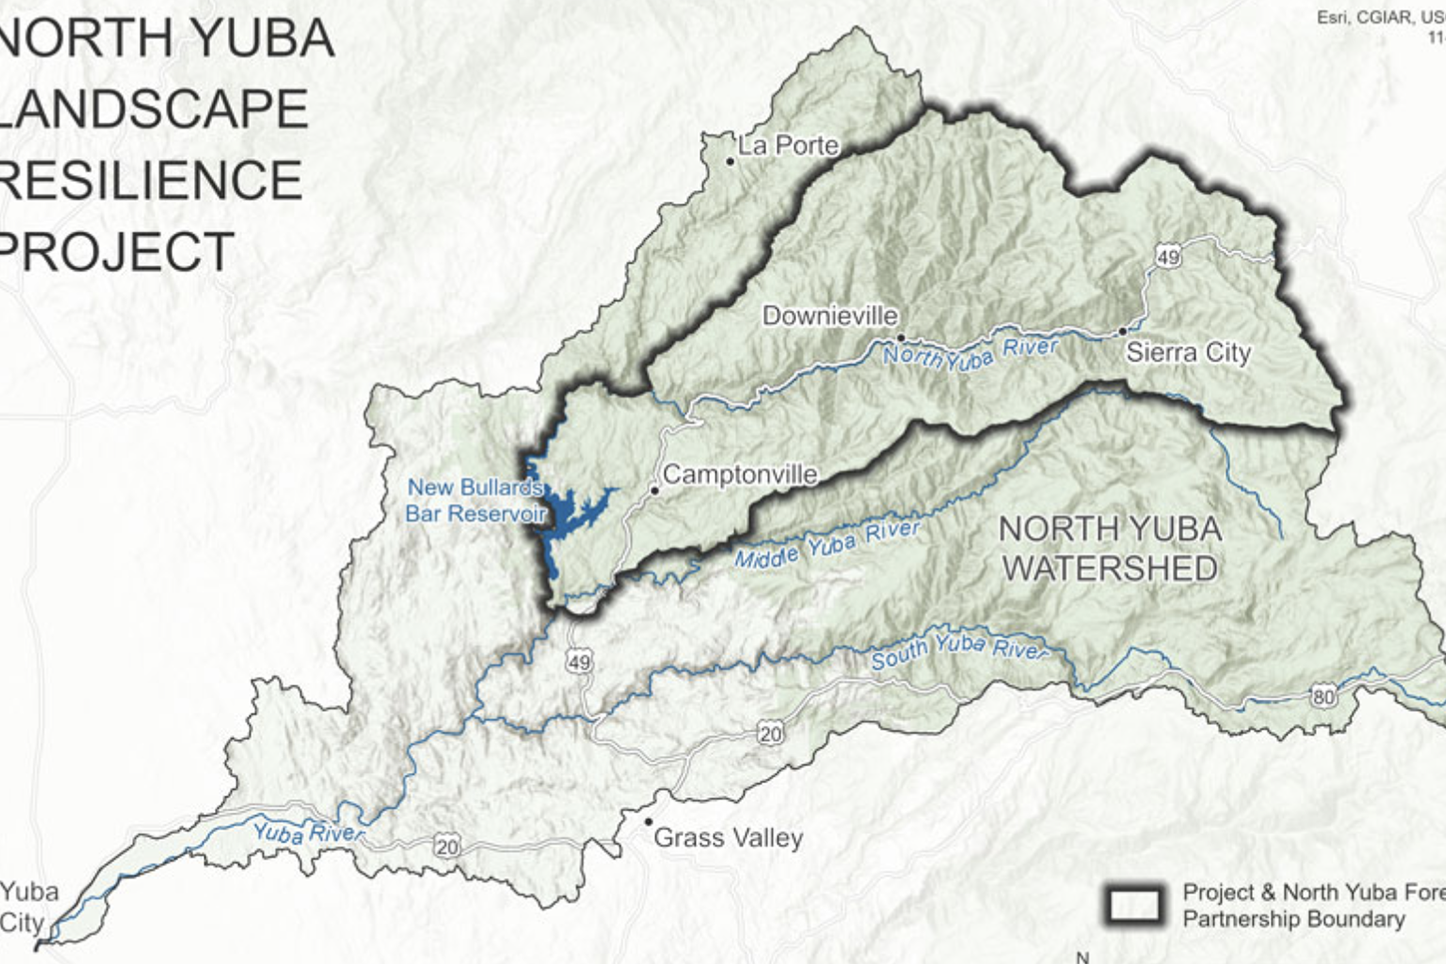 Map of North Yuba Landscape Resilience Project